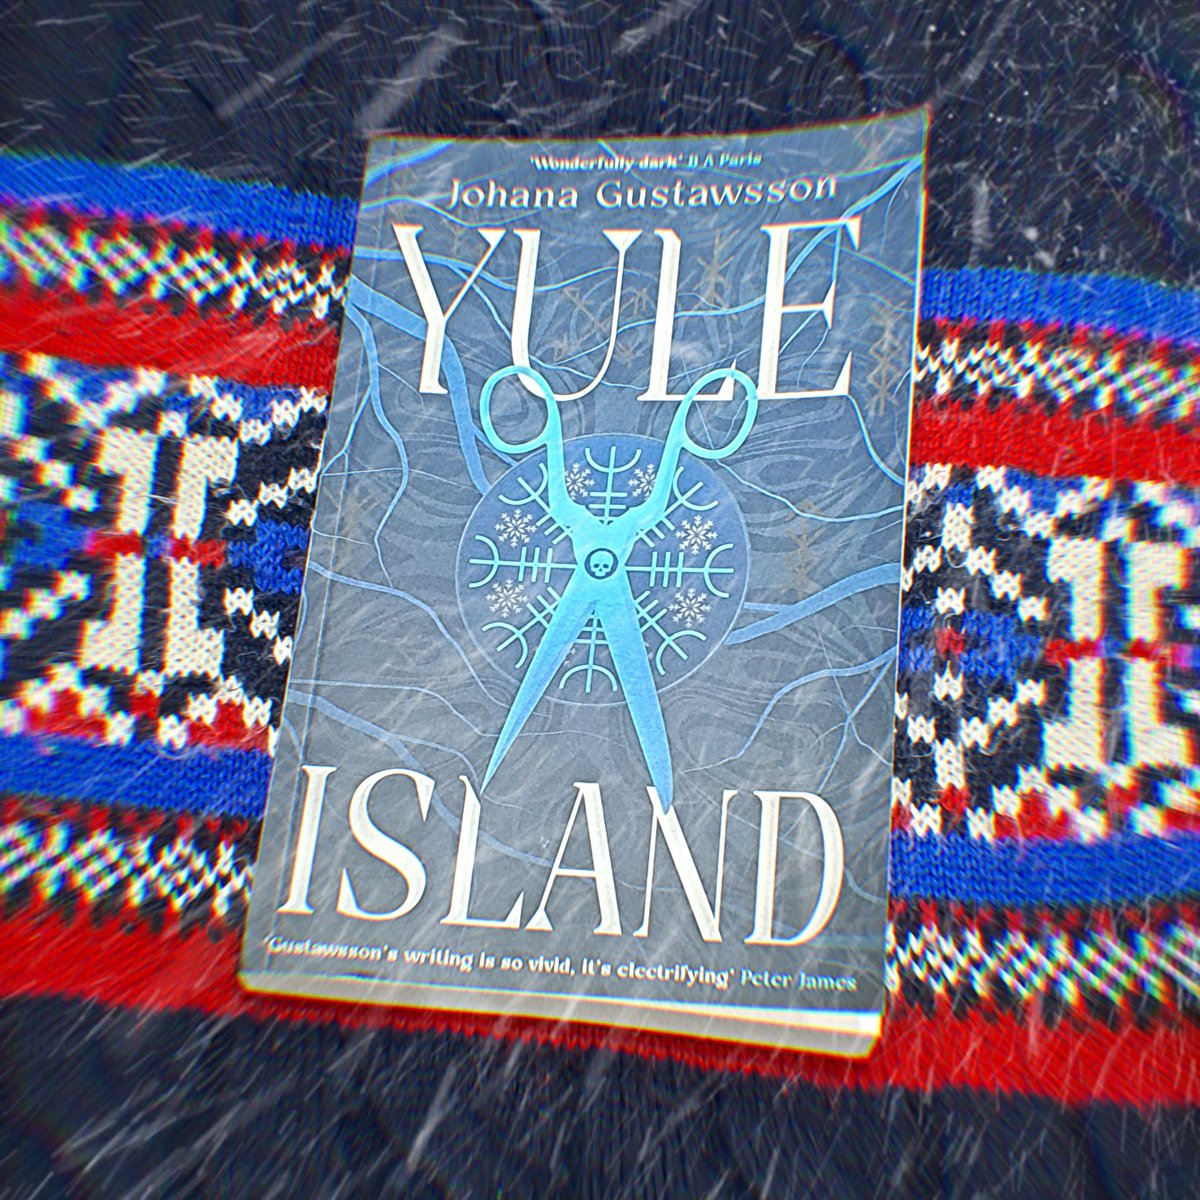 I've just read #YuleIsland by @JoGustawsson

❄️❄️❄️

An atmospheric and chilling gothic mystery. Expertly plotted with twists and secrets. Devilishly dark, sinister and compelling. The characters are so good that I hope this is the start of a new series.

A perfect winter read ❄️